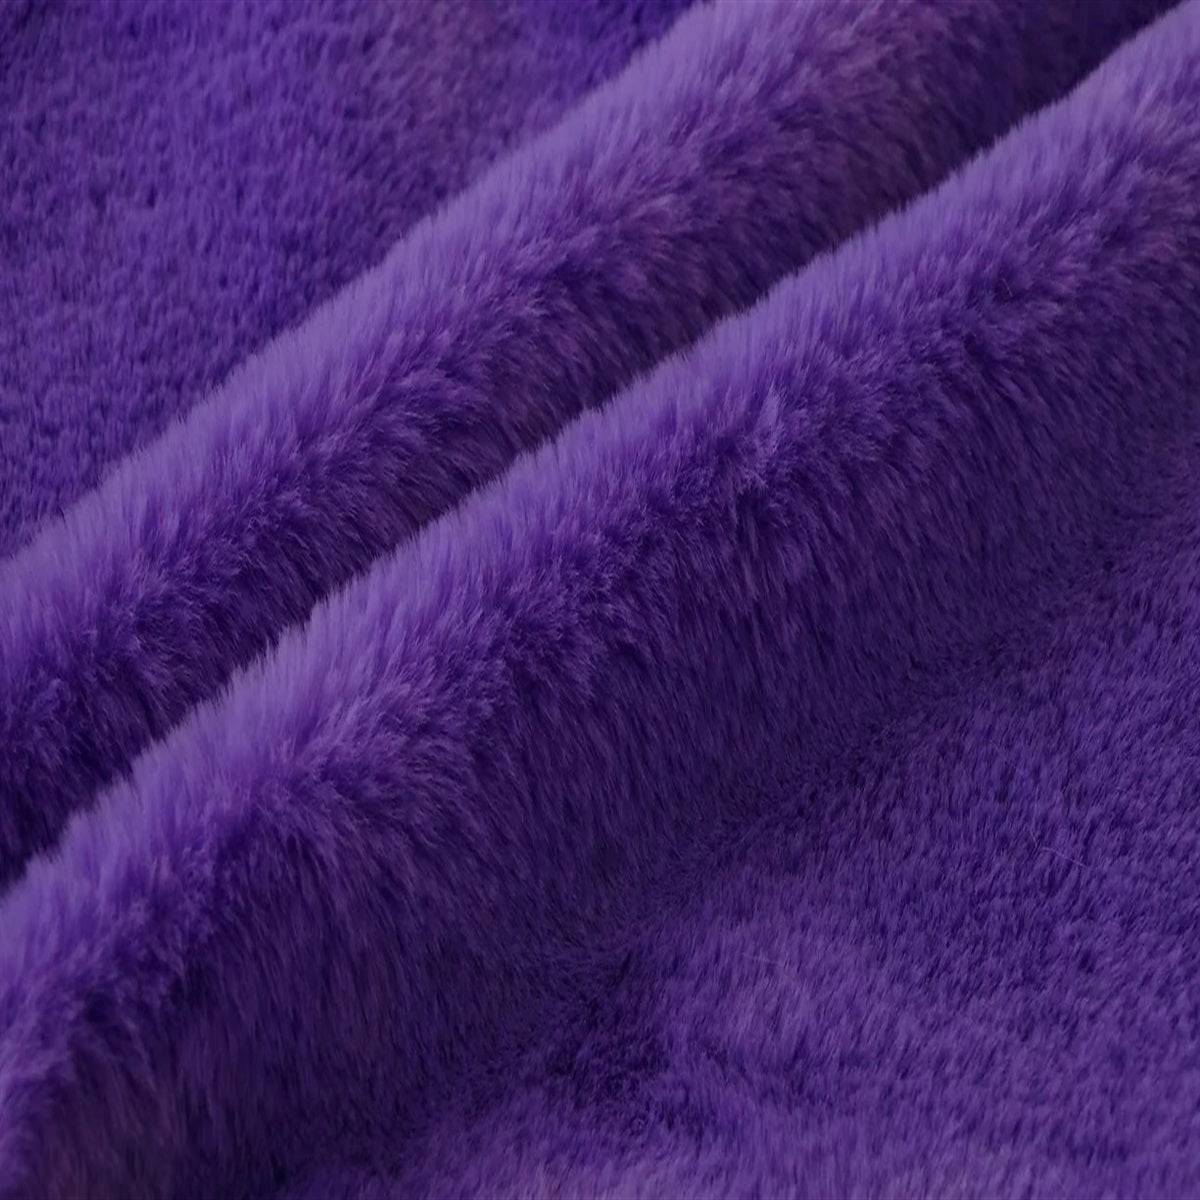 Bunny Thick Minky Fabric By The Roll (20 Yards)ICE FABRICSICE FABRICSPurpleBy The Yard (60 inches Wide)Bunny Thick Minky Fabric By The Roll (20 Yards) ICE FABRICS Purple